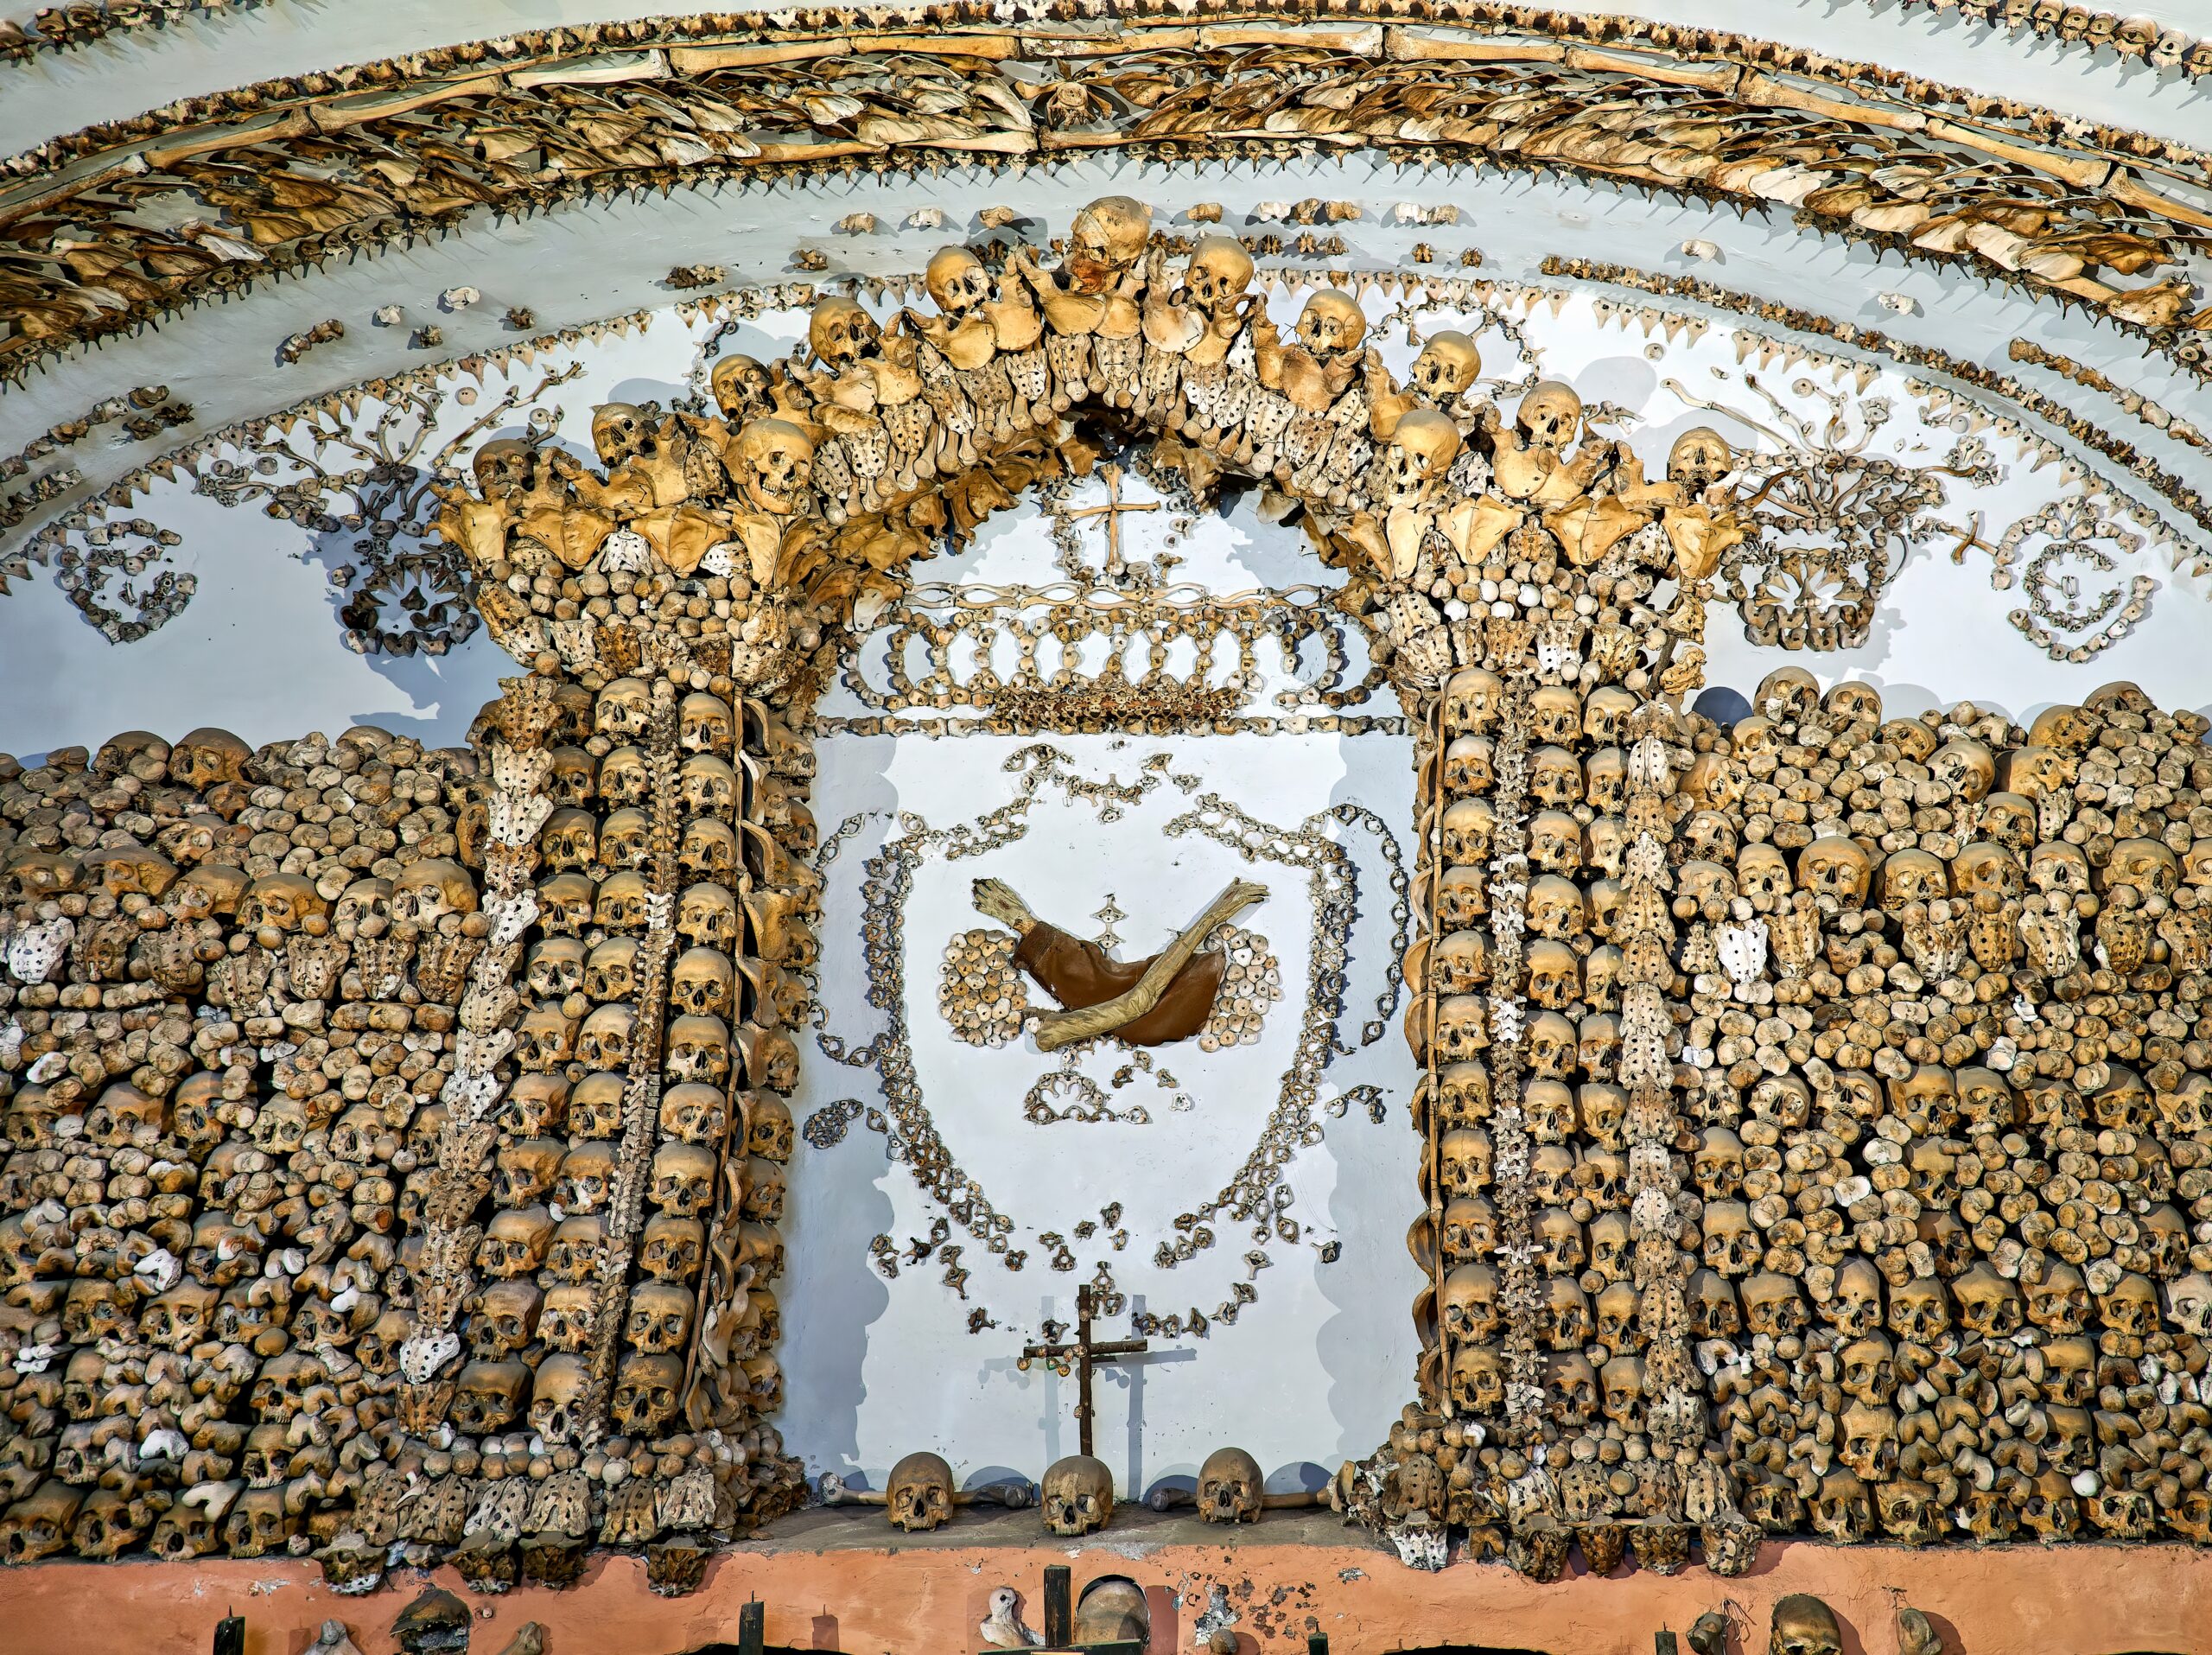 View of the eerie bone decorations inside the Capuchin Crypt in Rome